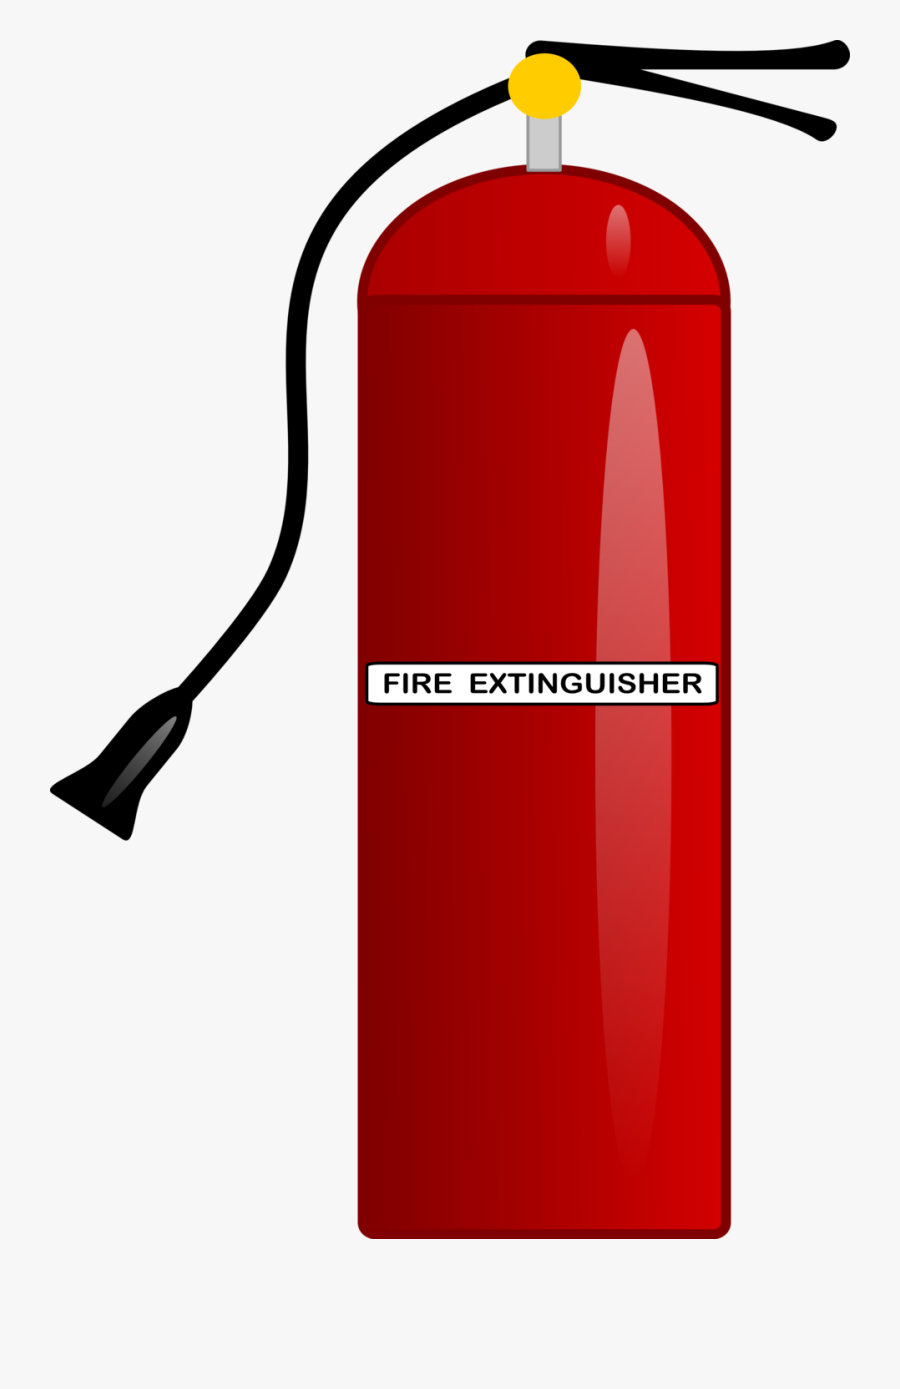 Free Fire Extinguisher Clipart Image - Fire Extinguisher Clipart Transparent Background, Transparent Clipart